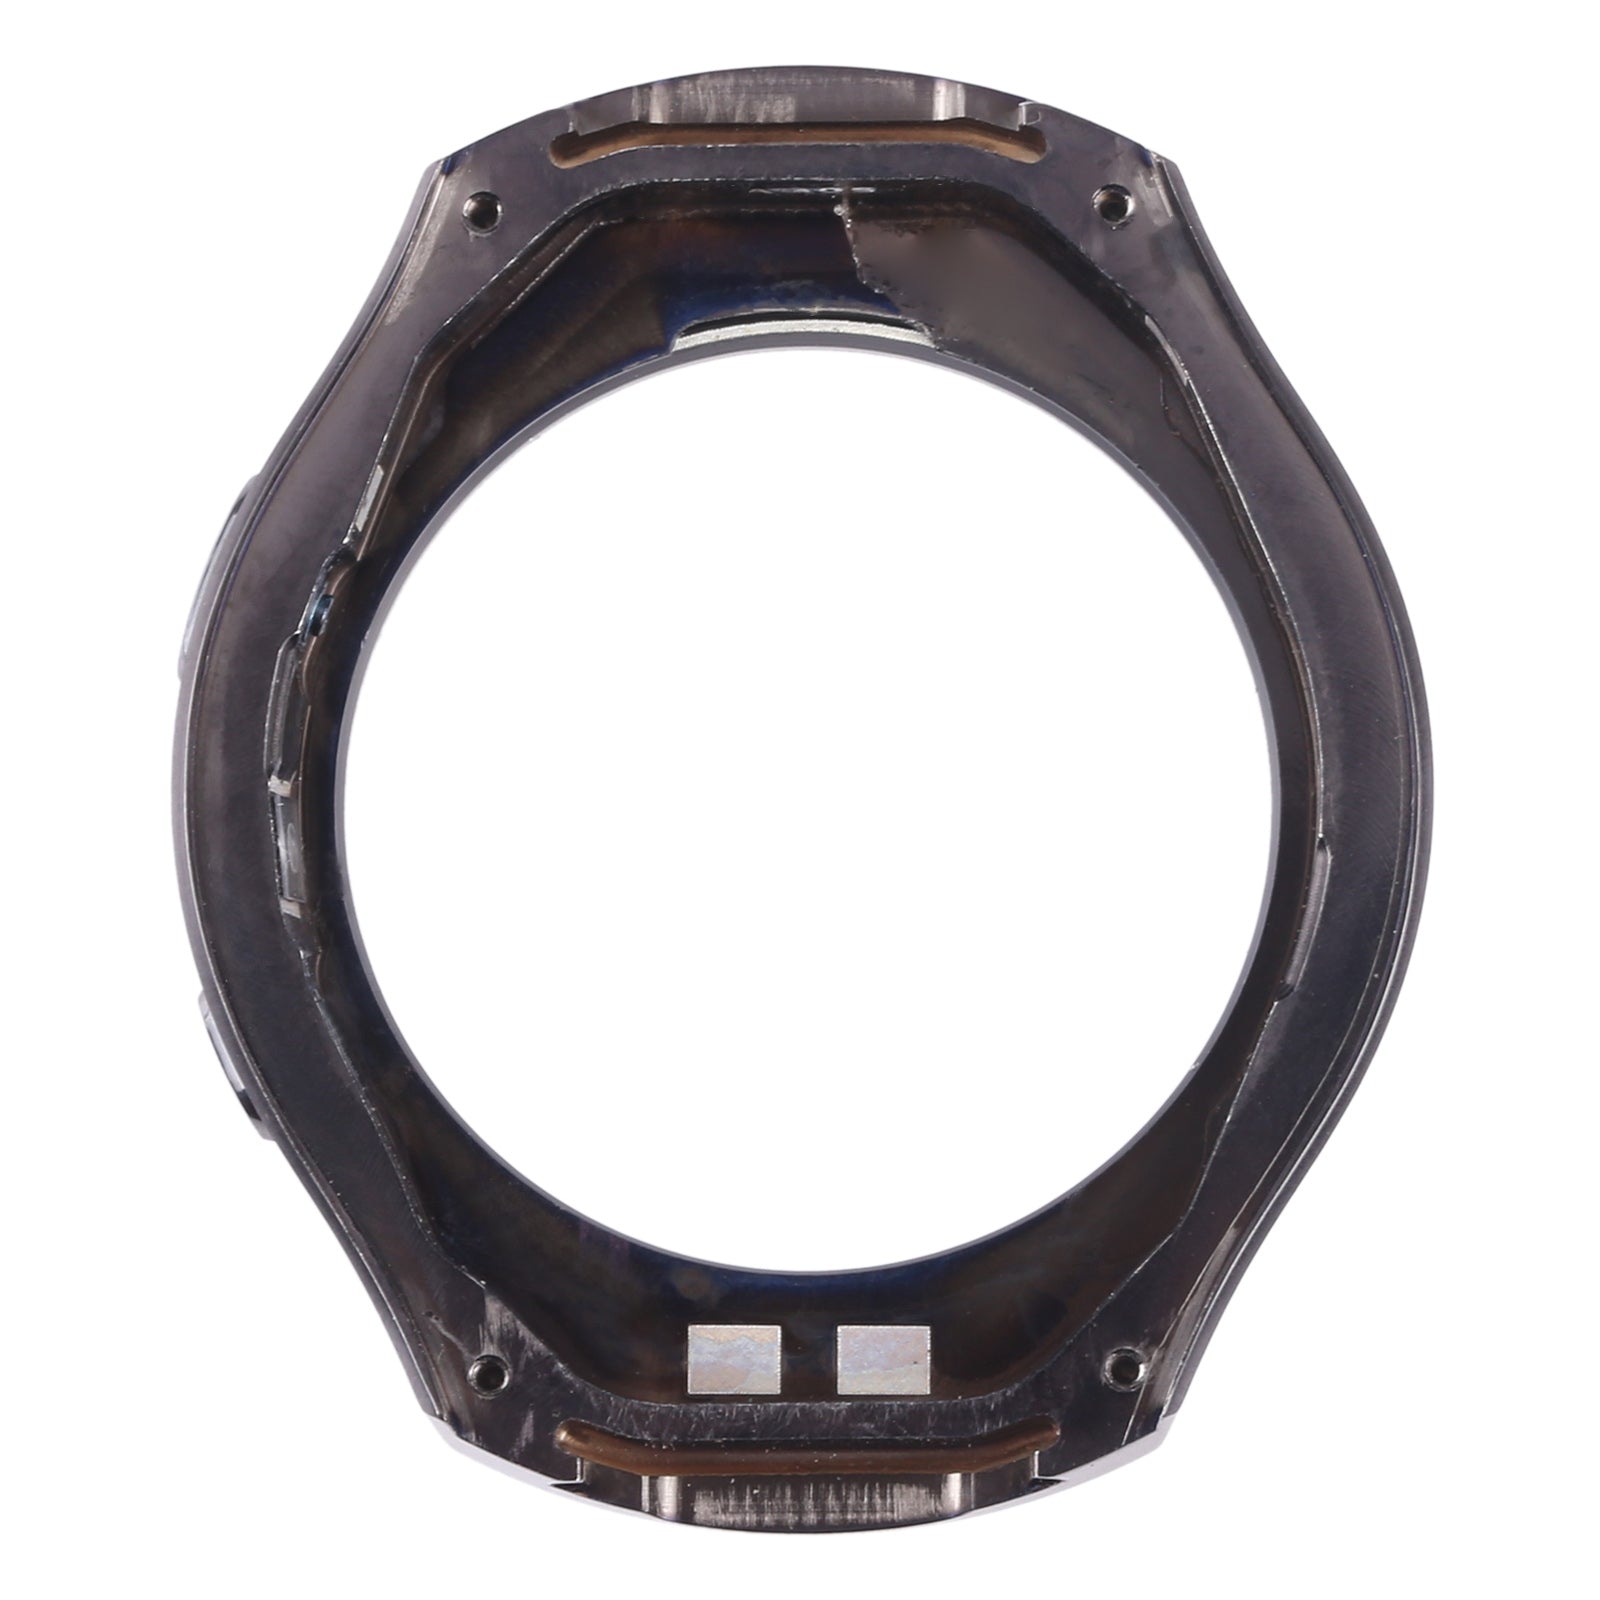 Chassis Front Frame Screen Samsung Galaxy Watch Gear S2 R720 Gray